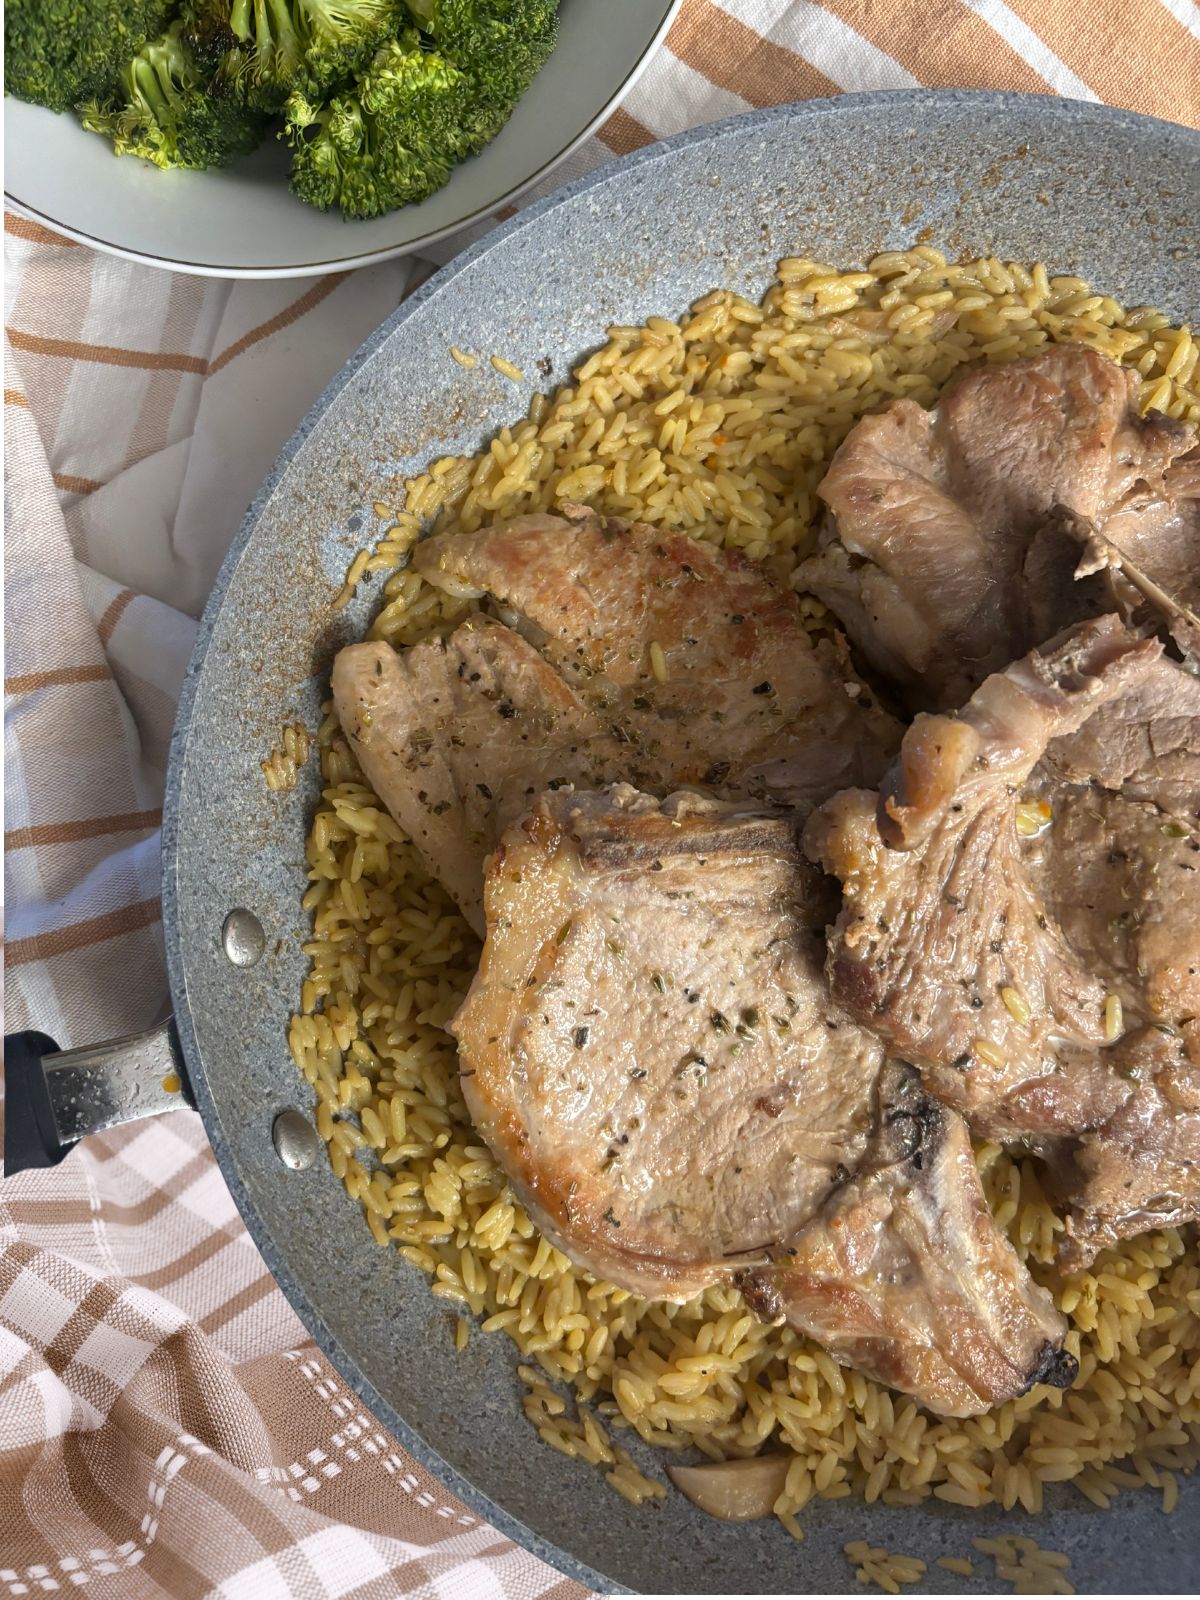 Pork chops in a fry pan with rice